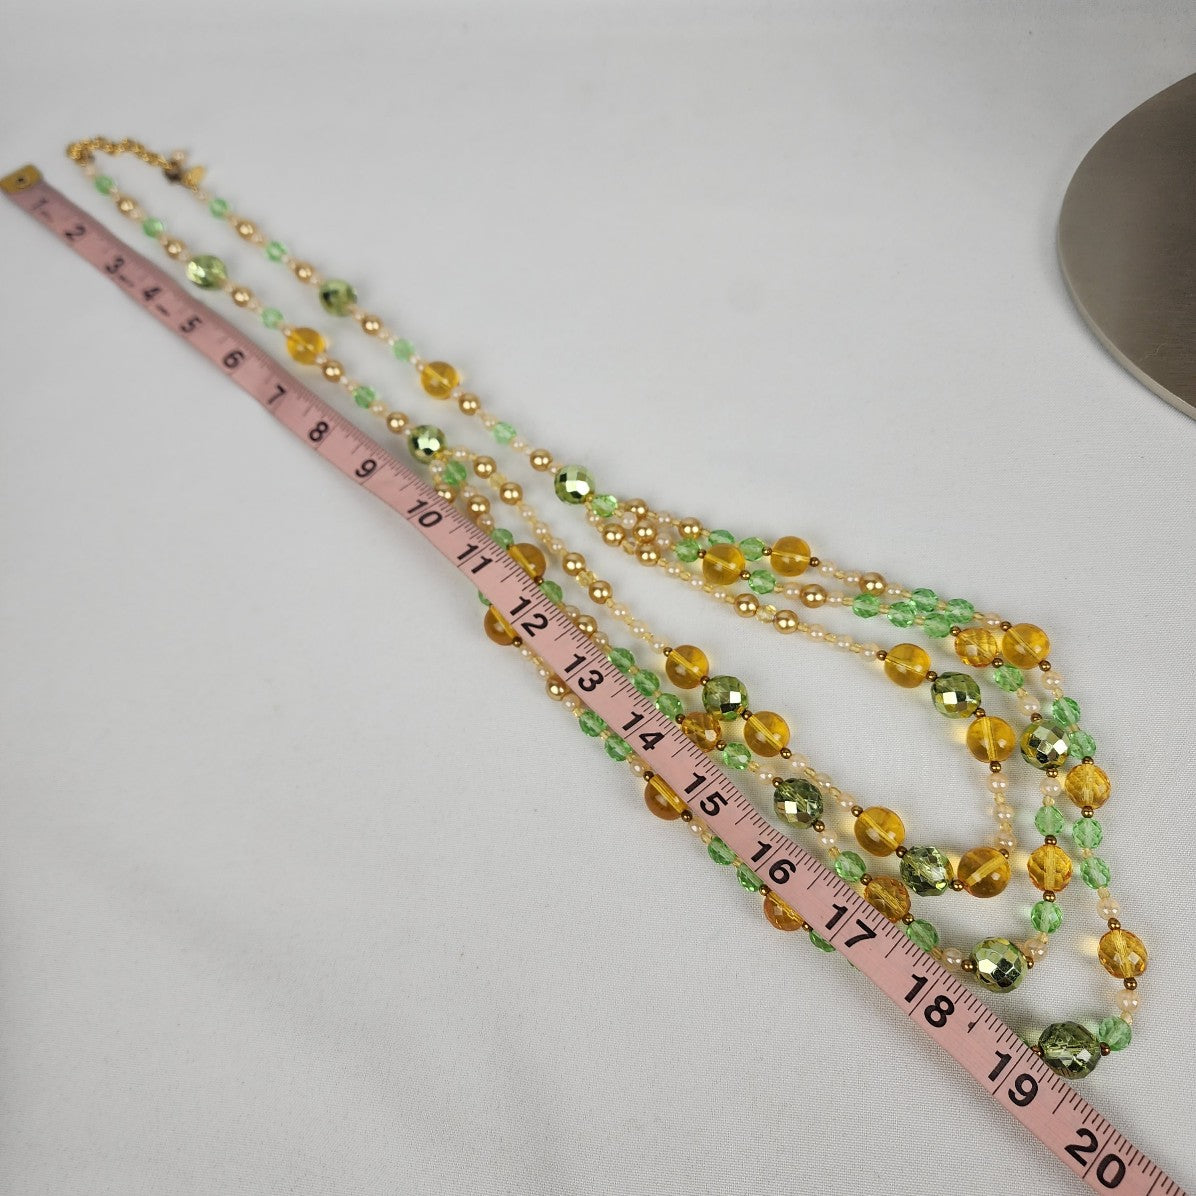 Joan Rivers Green Glass Beaded Layered Long Necklace